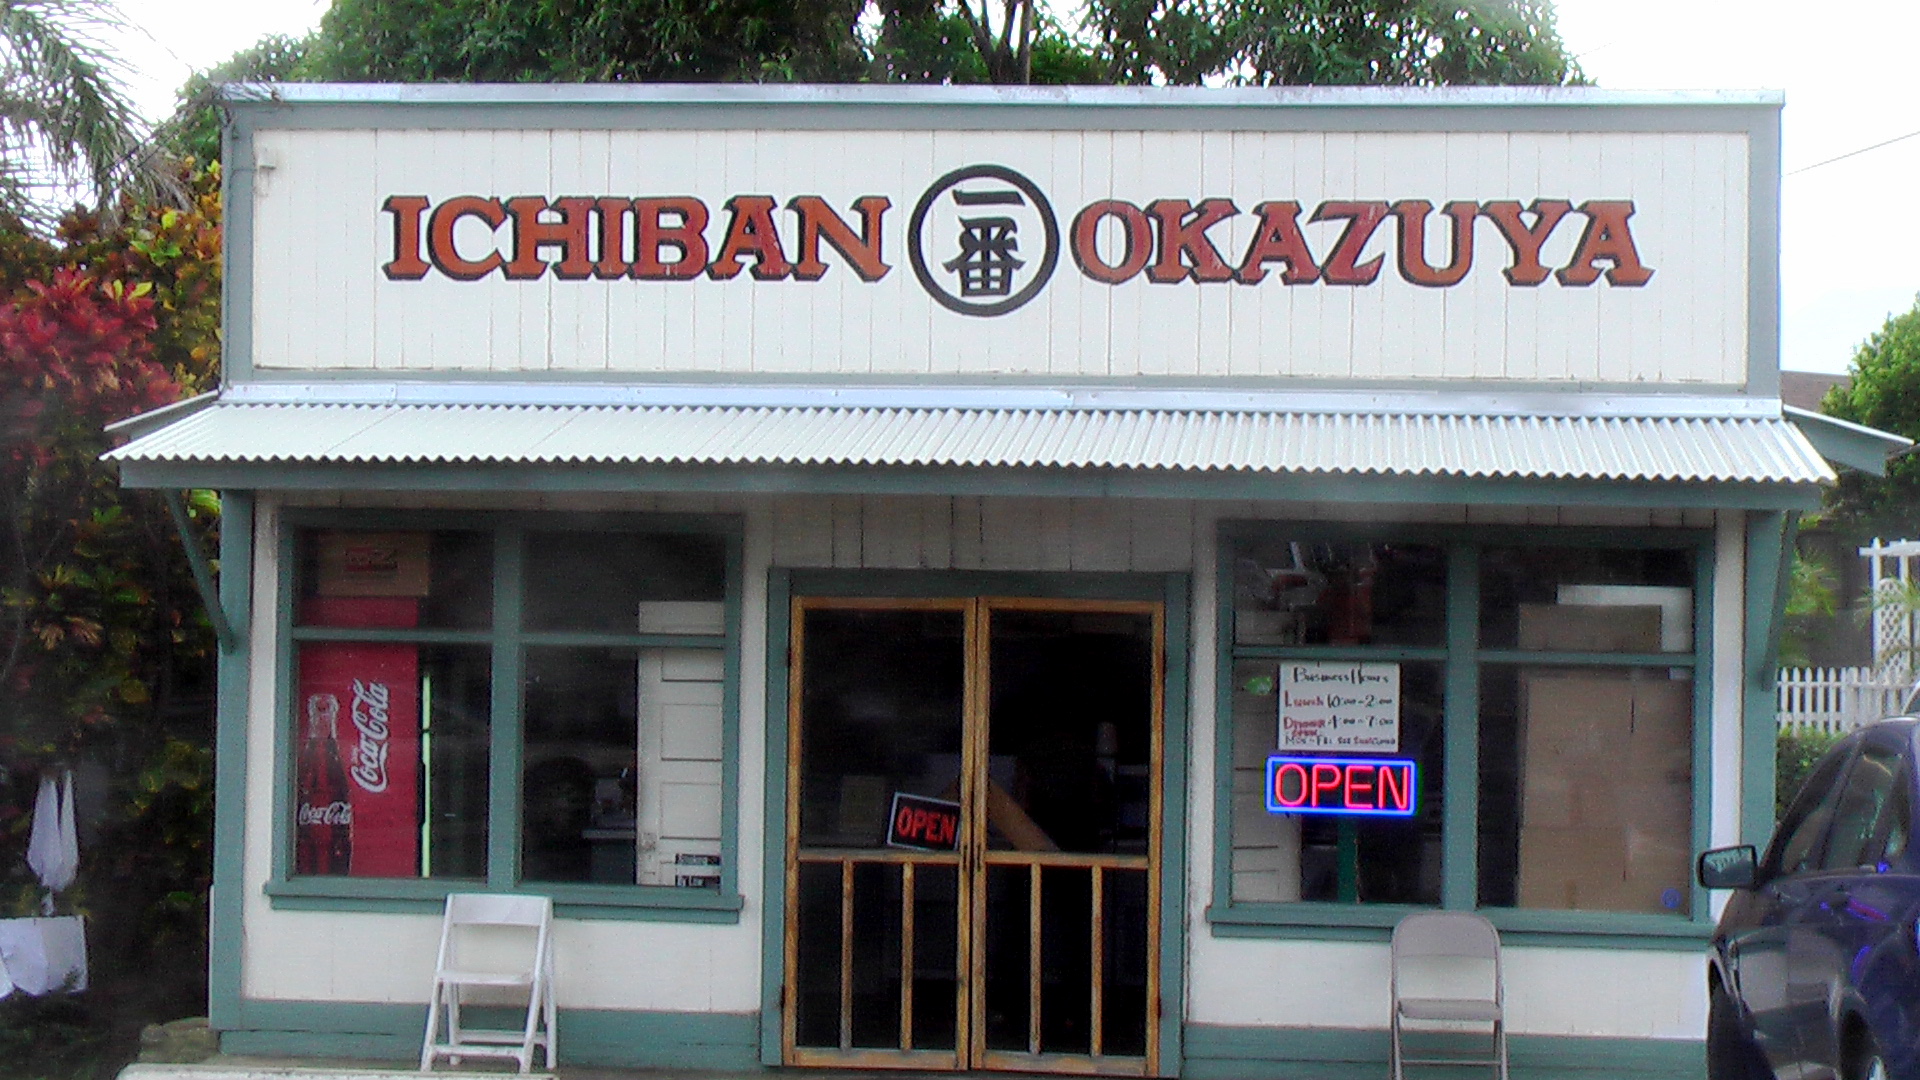 Glass panels and white storefront of the famous Japanese take-out restaurant, Ichiban Okazuya, and one of the best restaurants in Maui, Hawaii